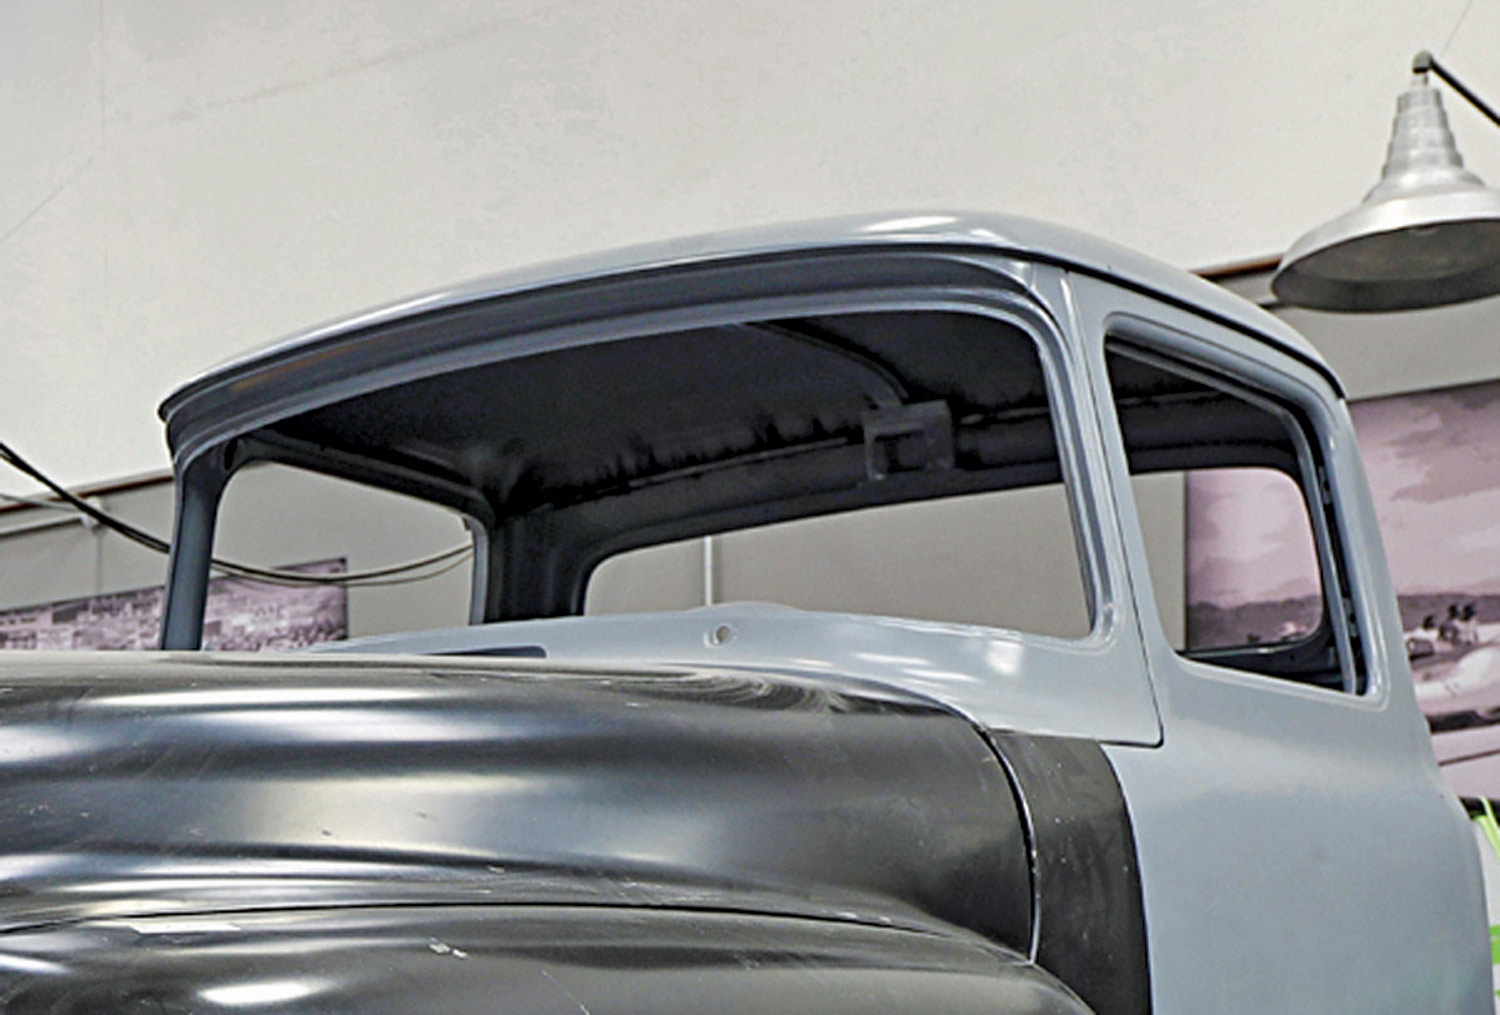 three quarter view of the Souza's F100, with a focus on the height of the lip below the windshield